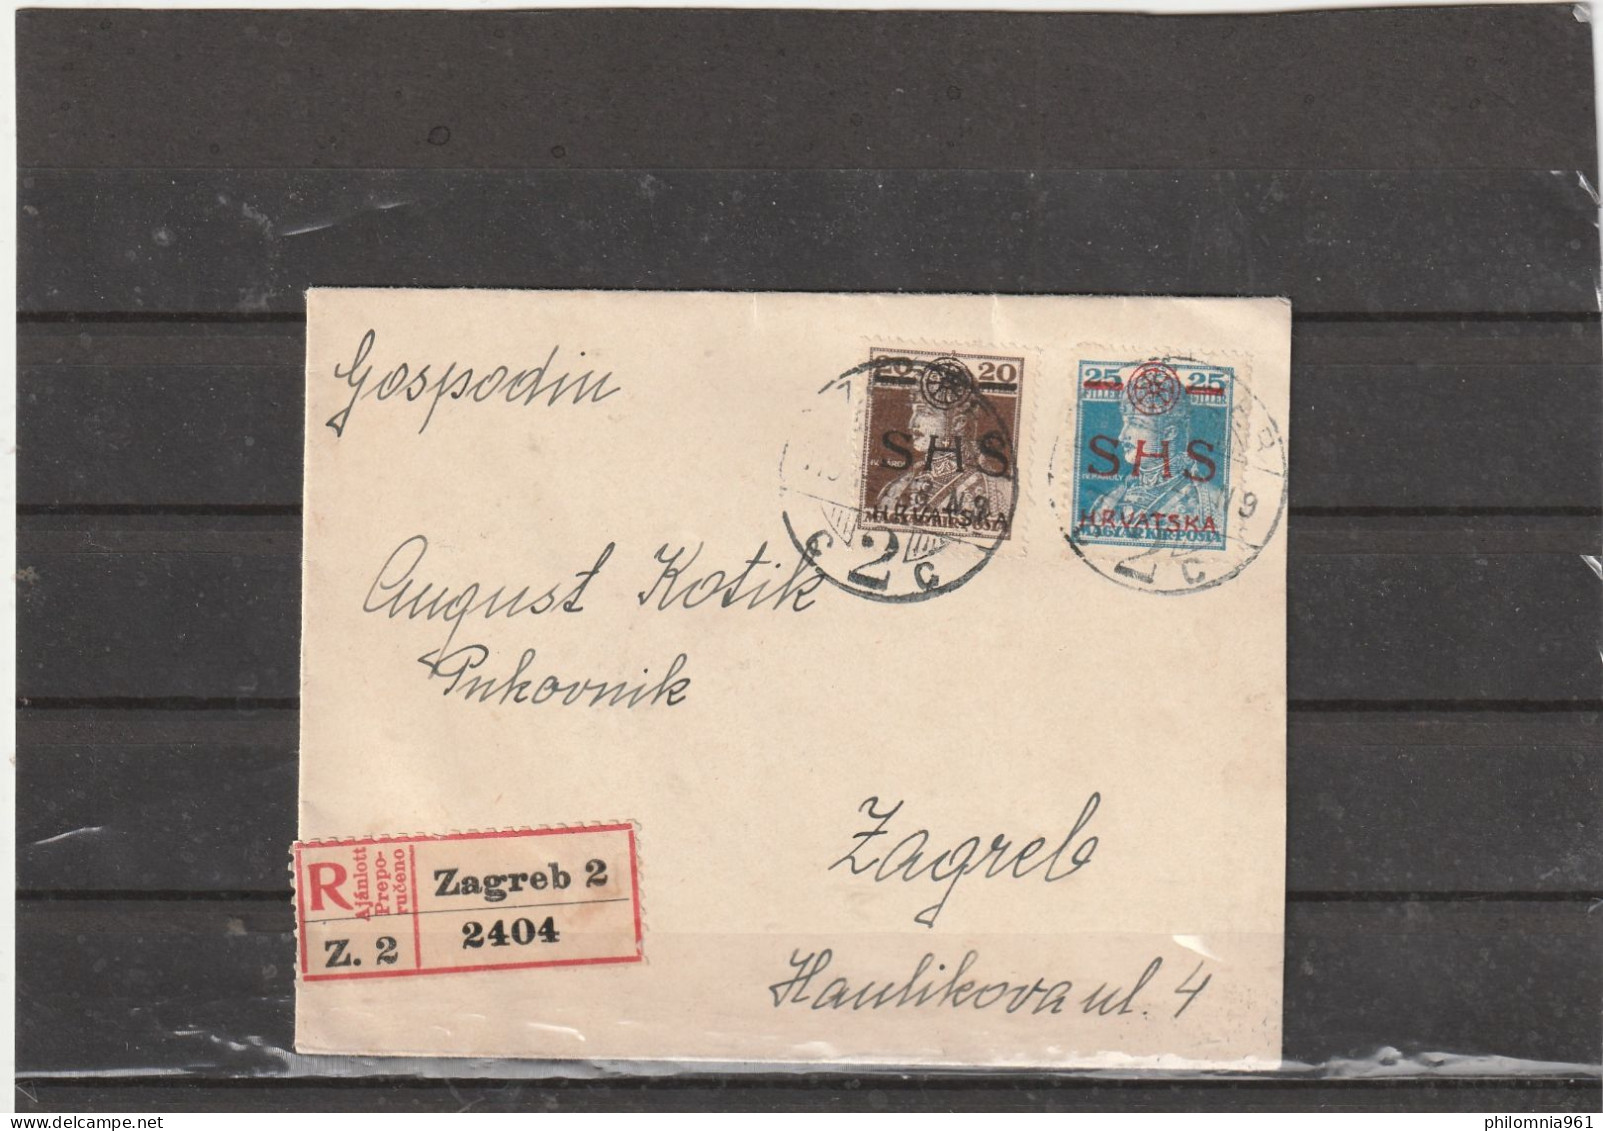 Yugoslavia ISSUE FOR Croatia Zagreb REGISTERED LOCALLY USED COVER 1918 - Covers & Documents